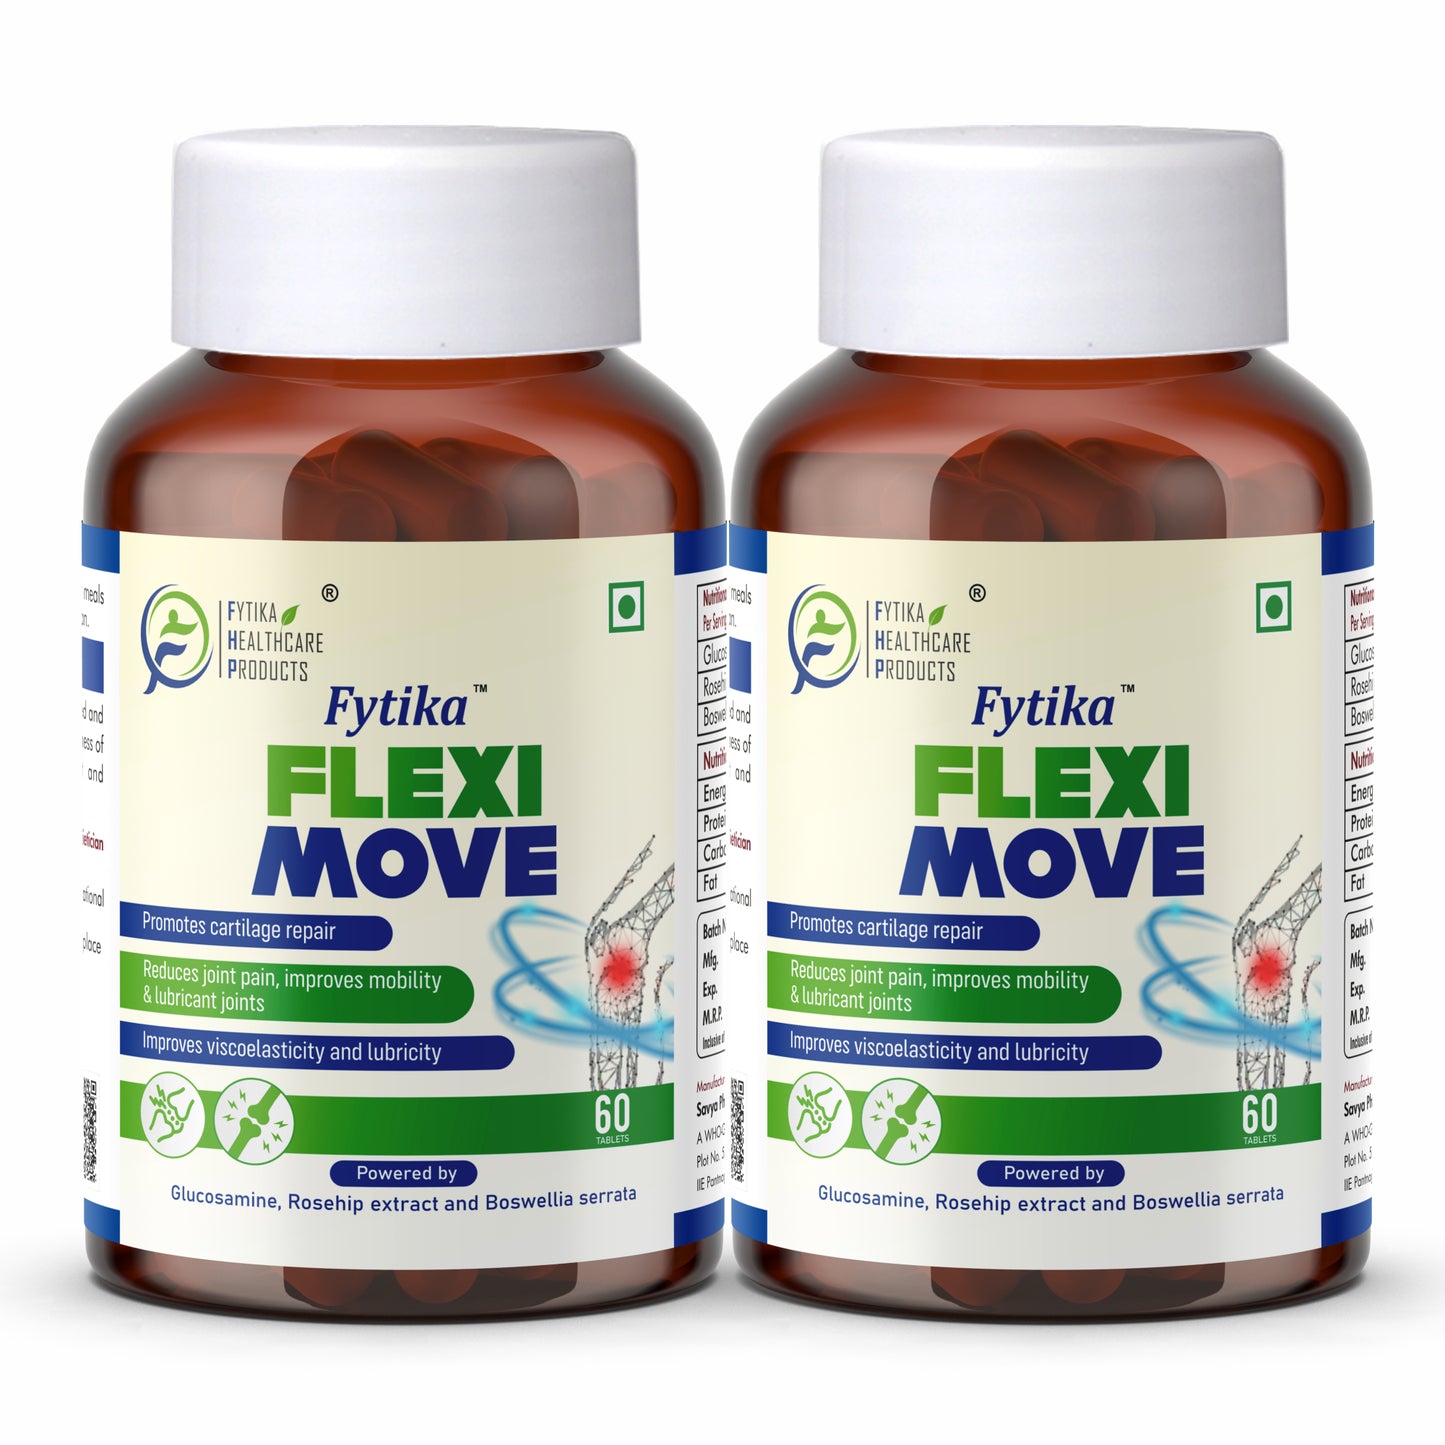 Fytika Flexi Move - Joint Support Supplement, Glucosamine, Rosehip, Boswellia Serrata, Supports Bone, Joint, Cartilage Health, For Men, Women - 60 Tablets